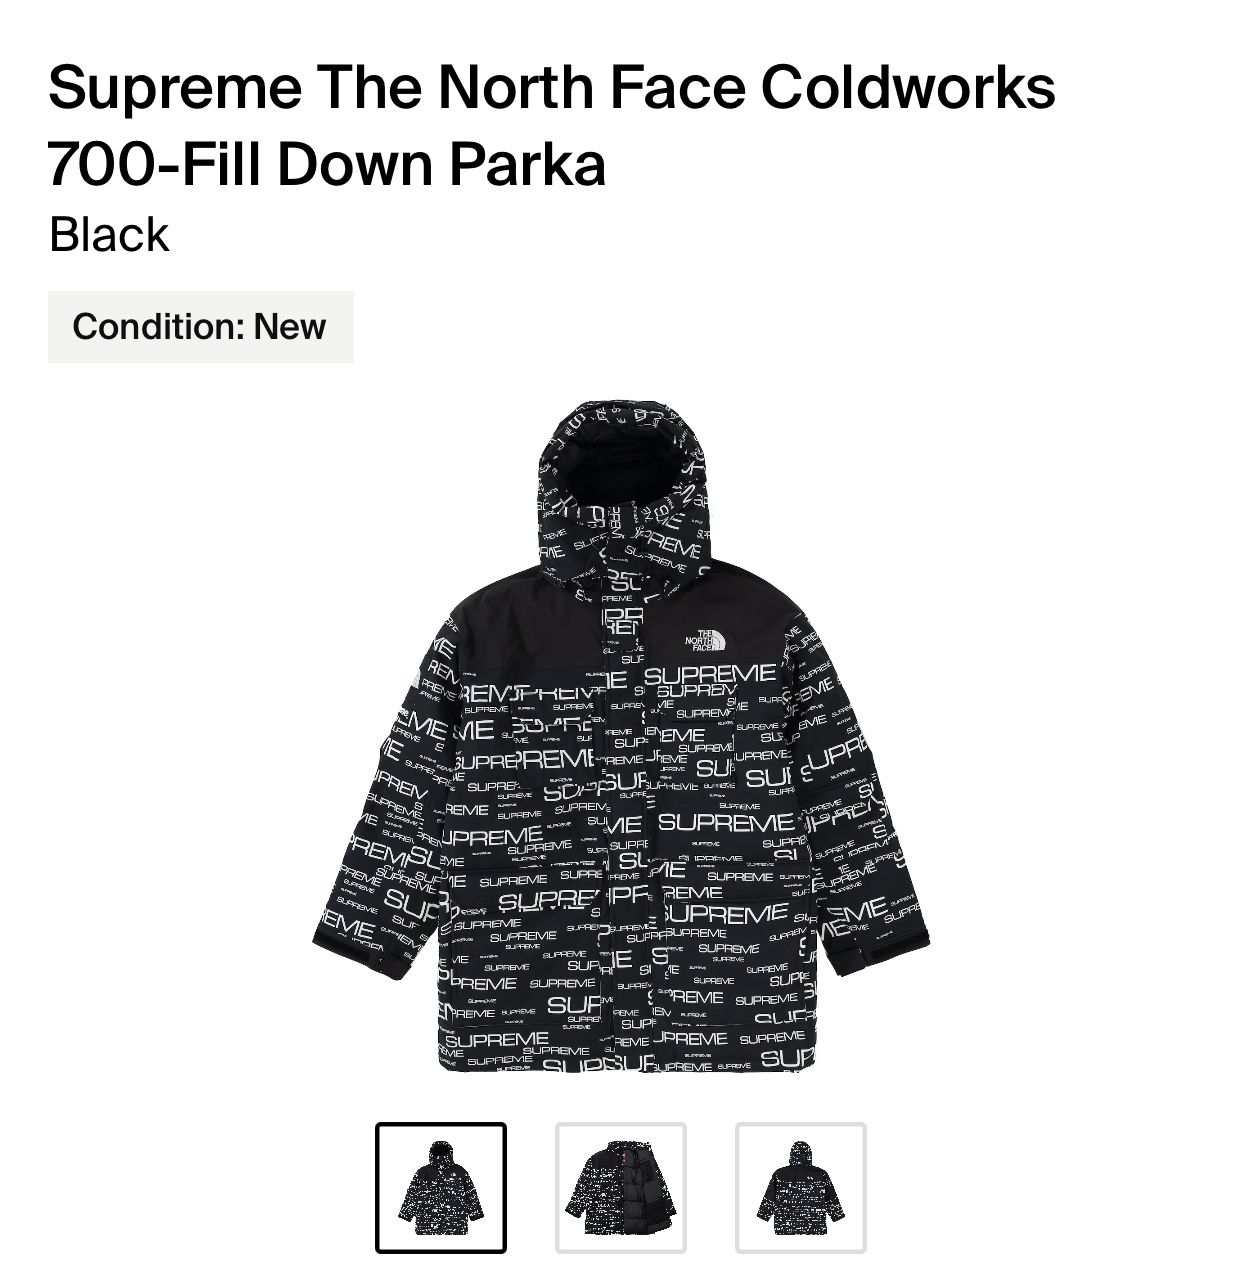 Supreme X The North face Coldworks 700-Fill Down Parka Size Large